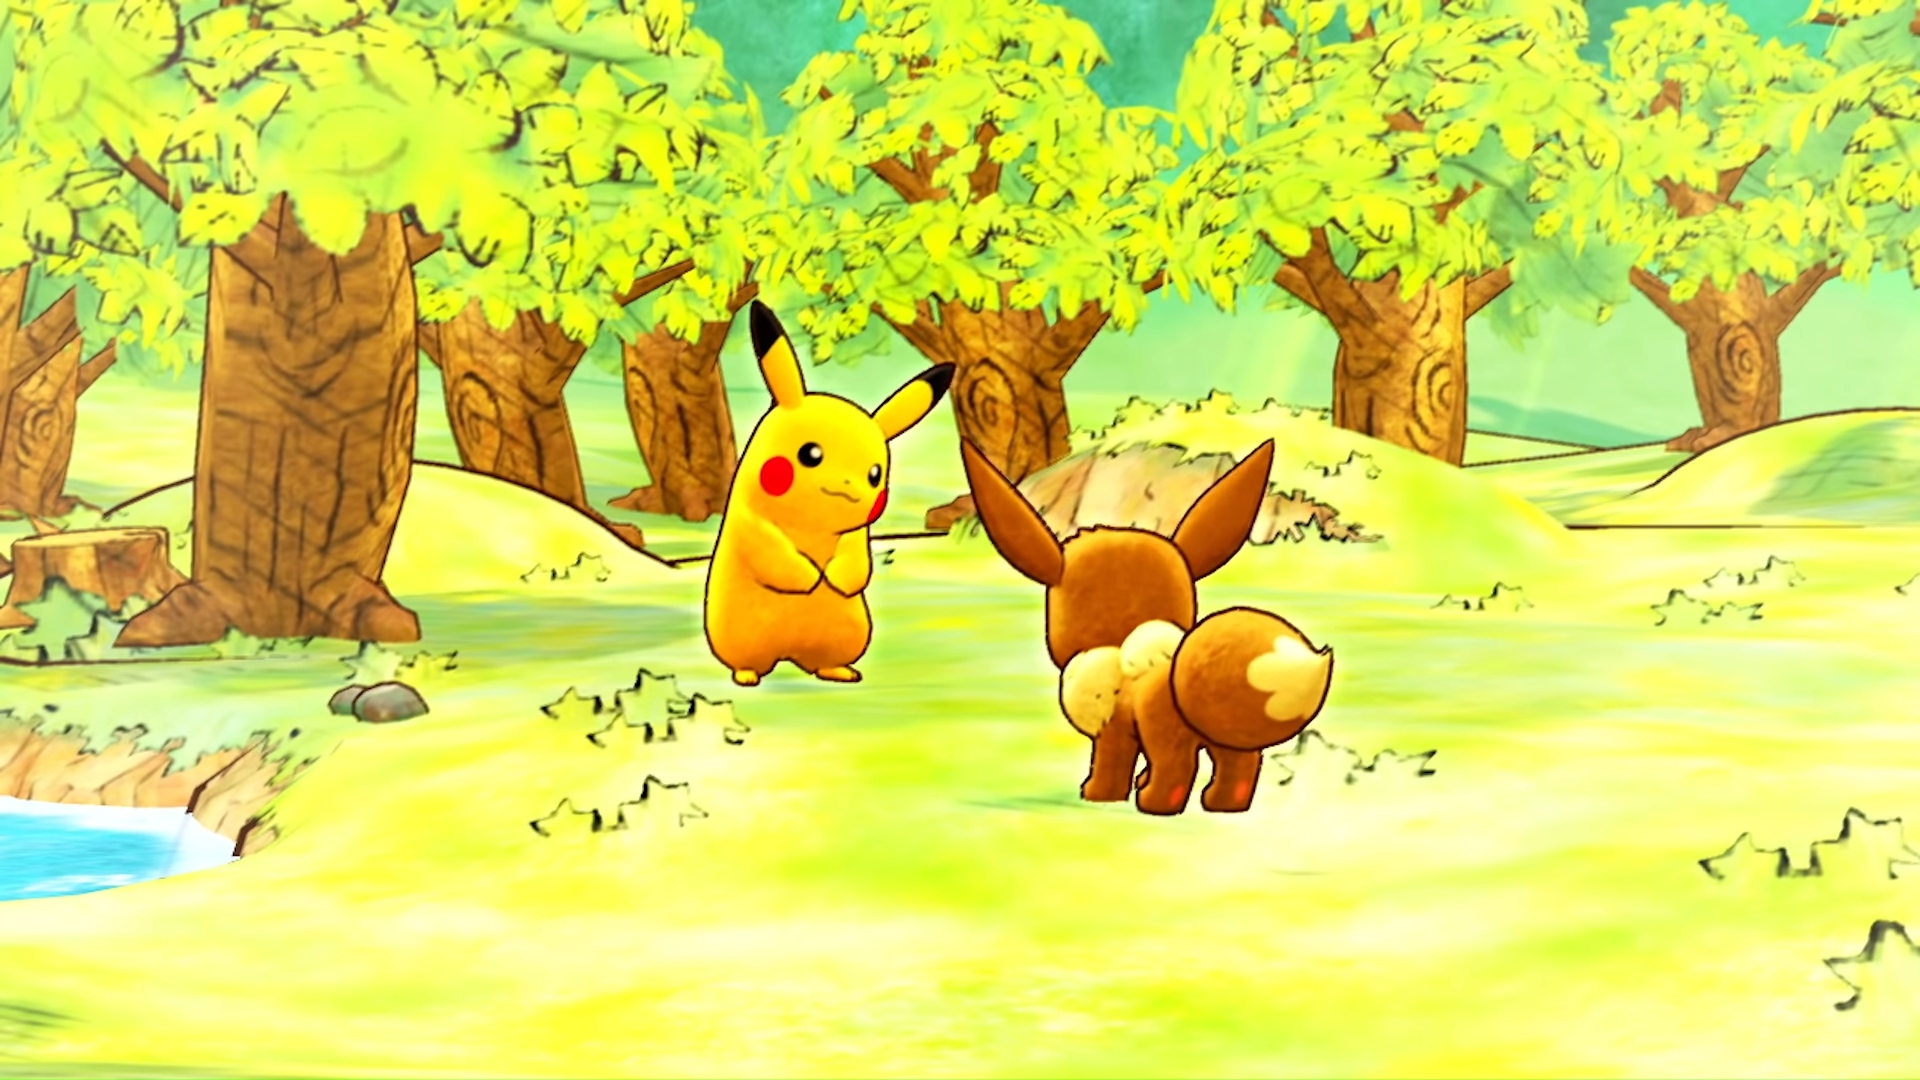 Pokémon Switch games: Pokémon Mystery Dungeon: Rescue Team DX. Image shows a Pikachu and an Eevee in a field.